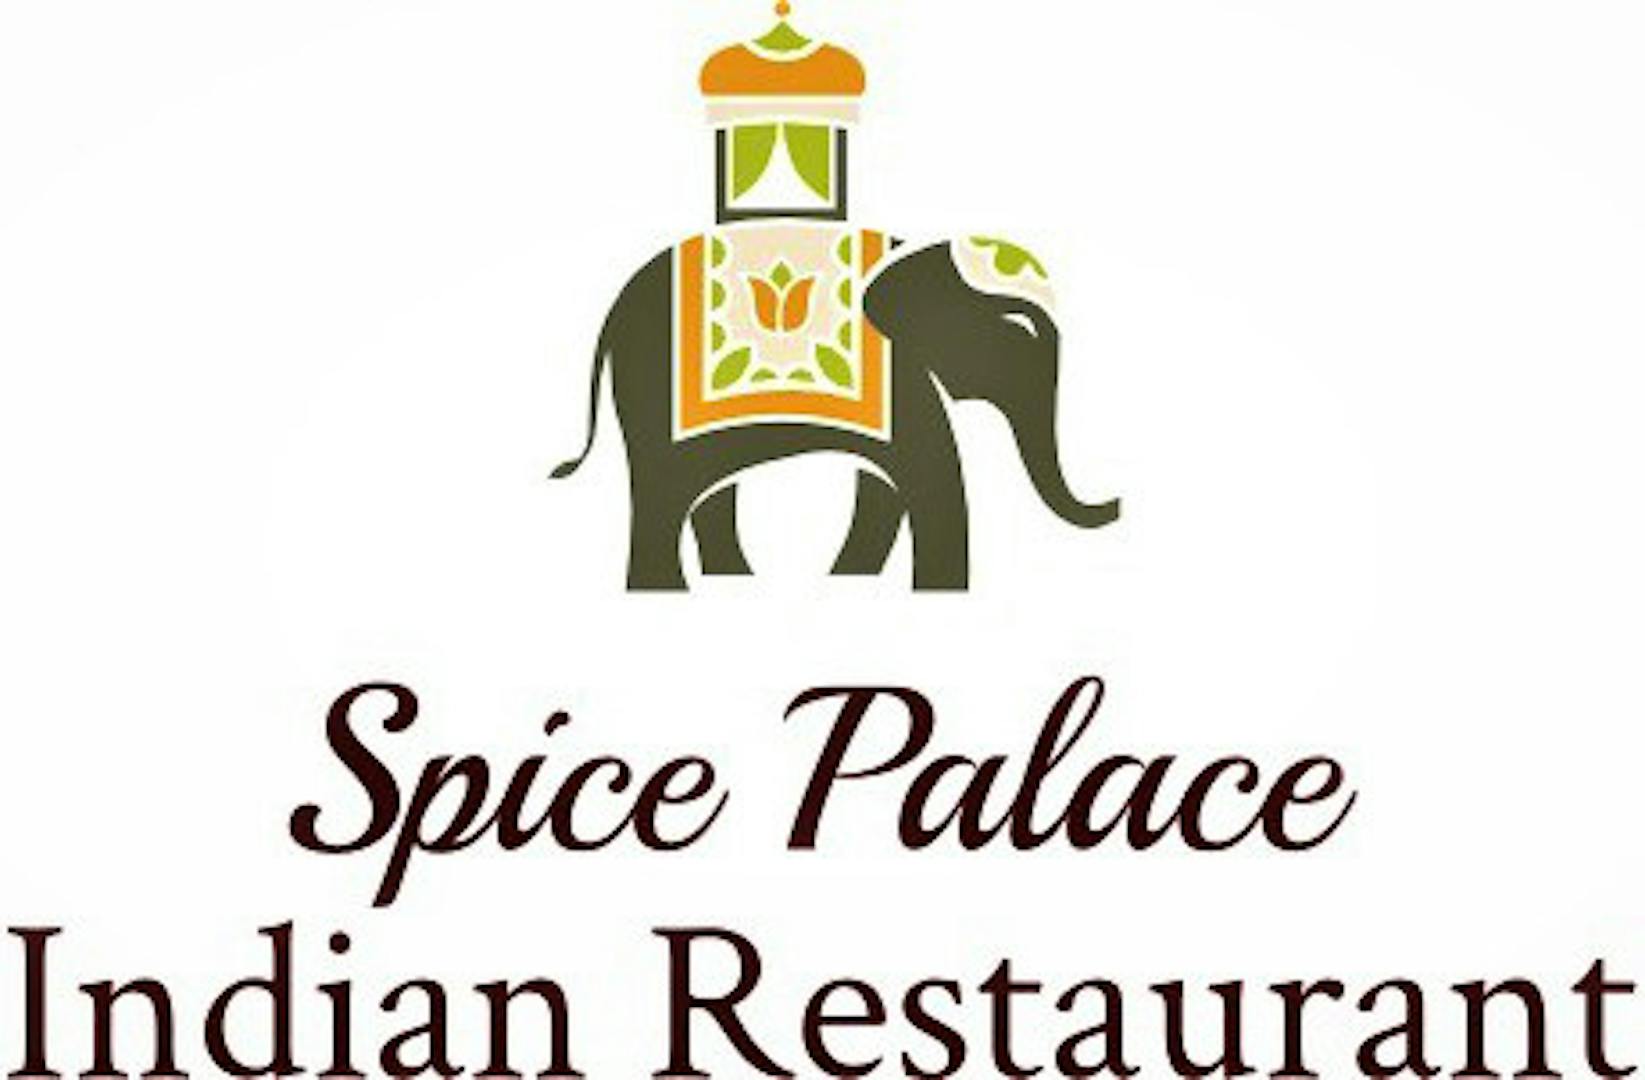 Spice Palace Indian Restaurant